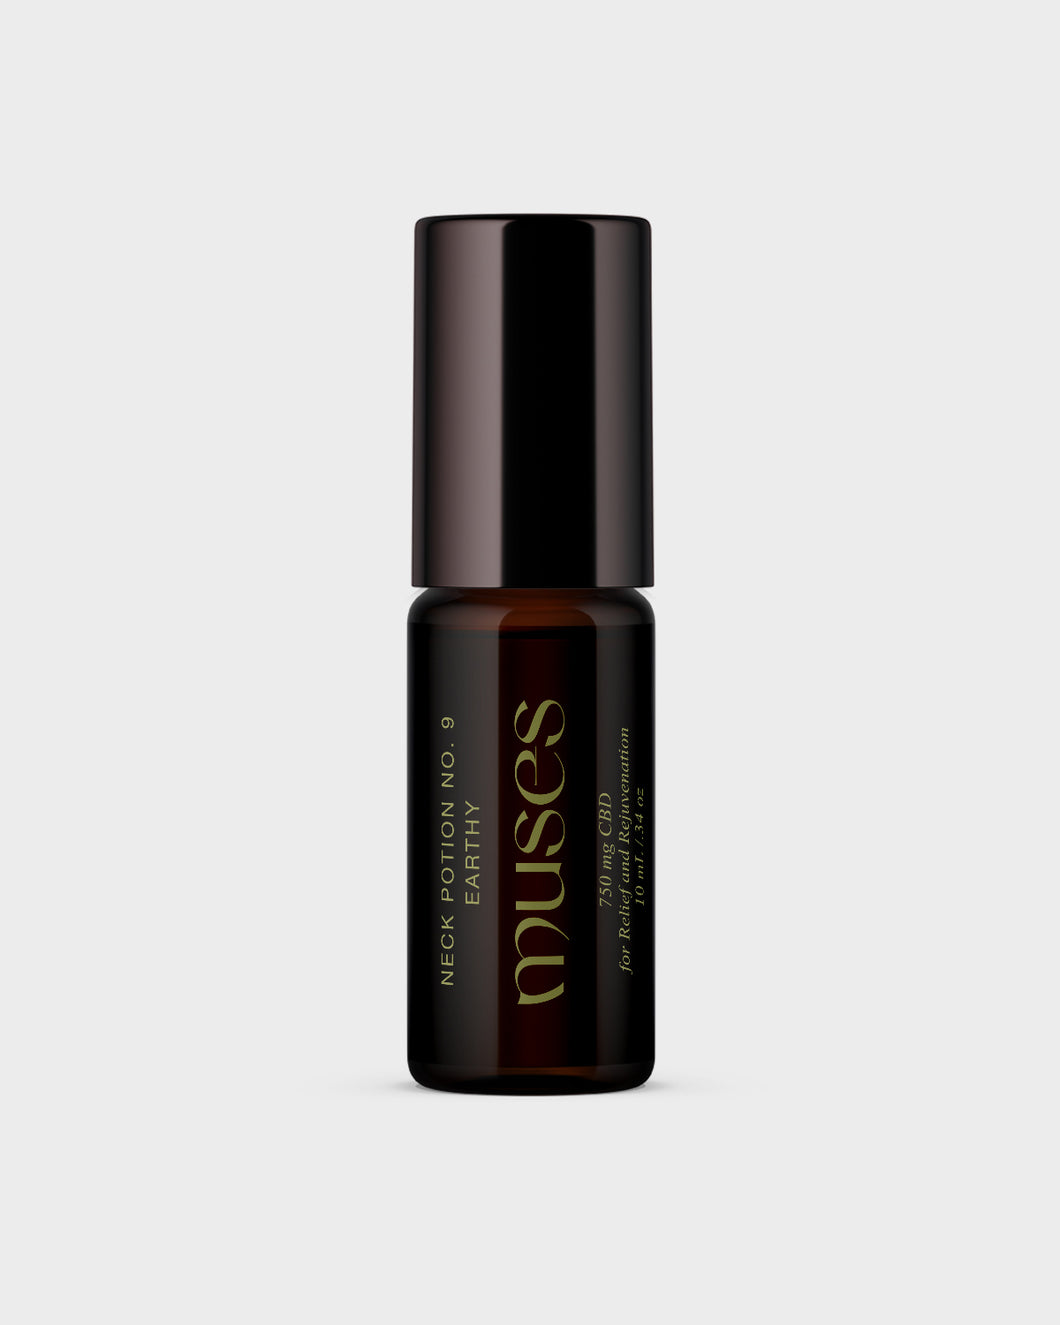 Muses Neck Potion No. 9 Earthy